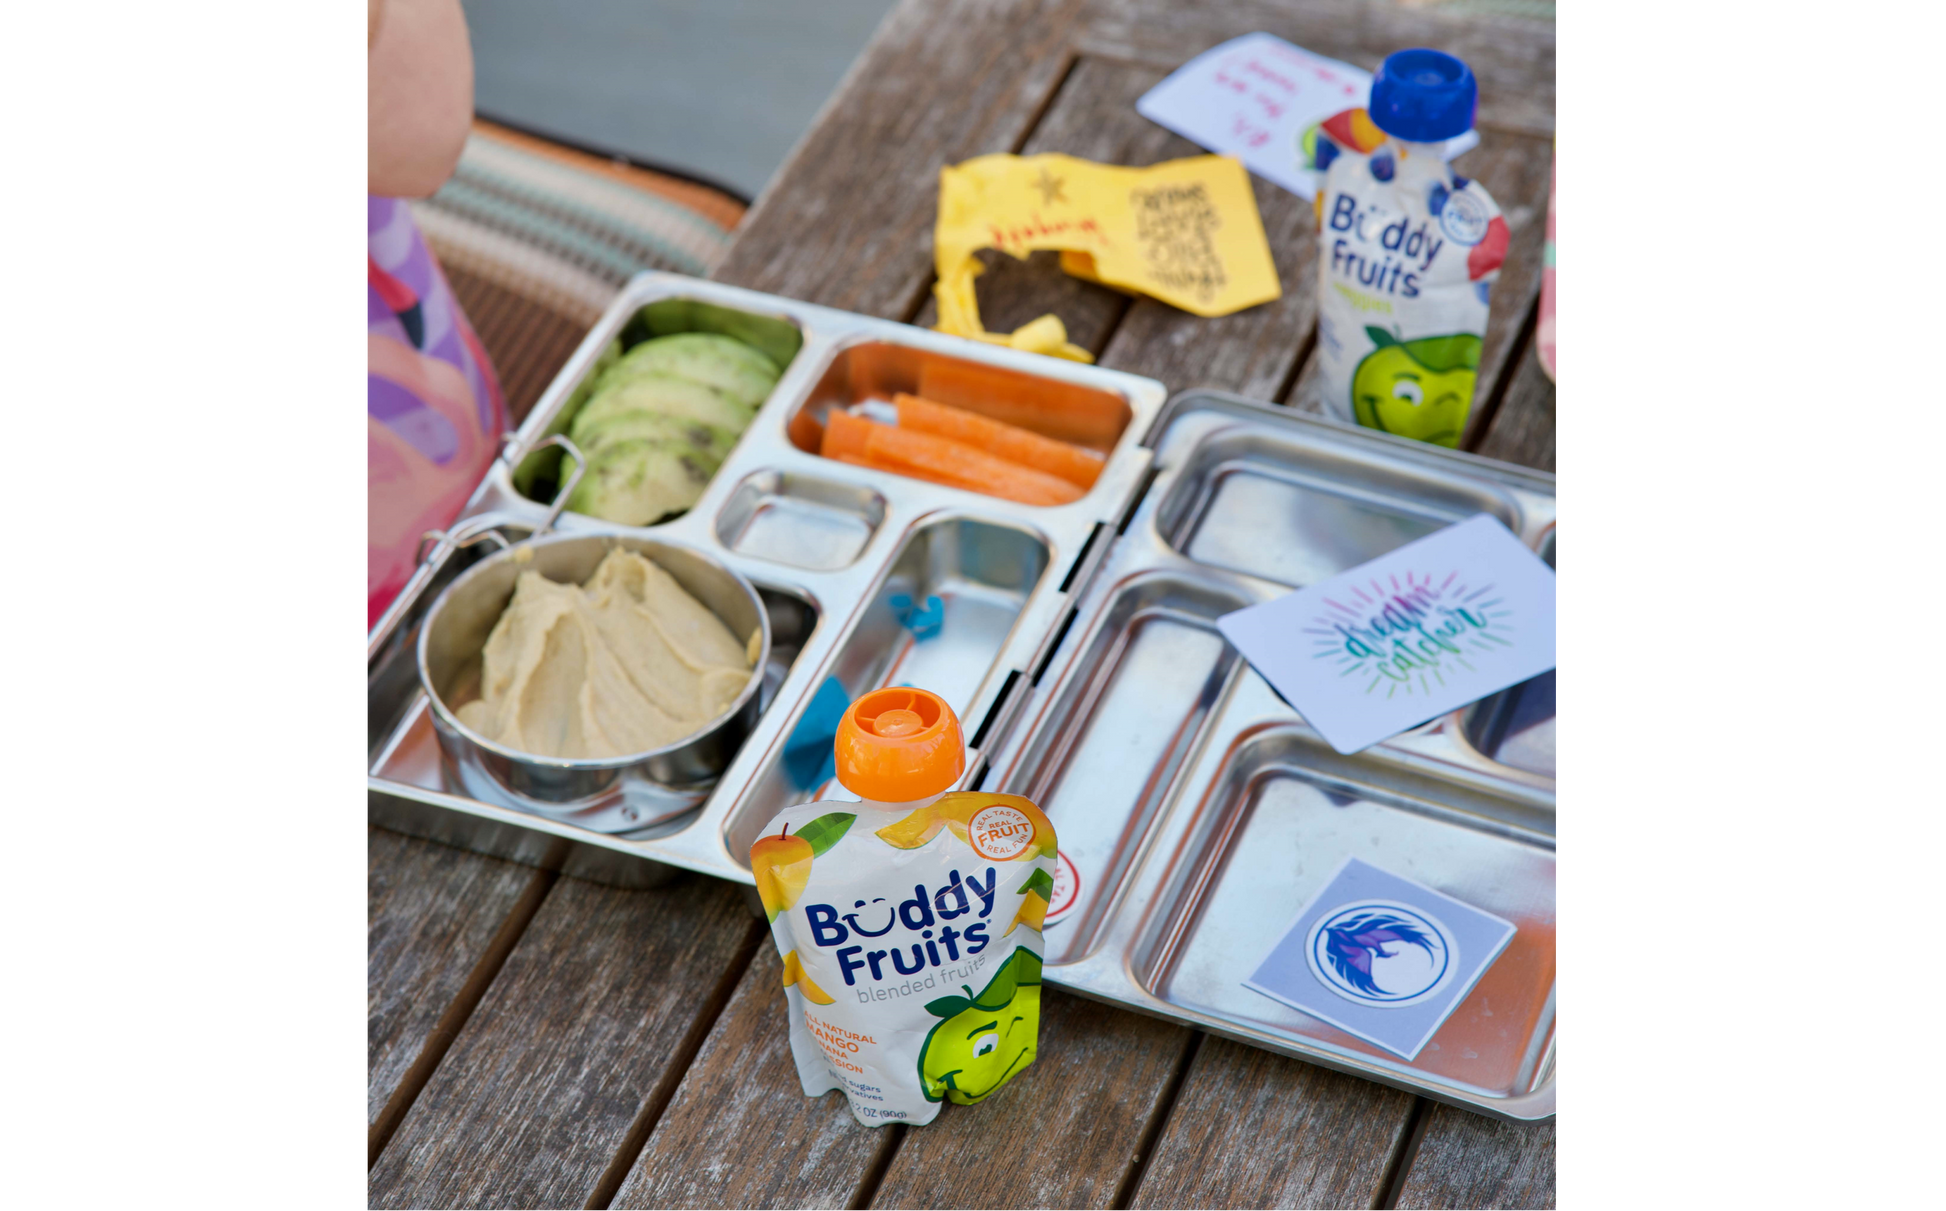 A child's lunch is accompanied by a tropical flair from the Buddy Fruits Mango, Banana, & Passionfruit fruit pouch.